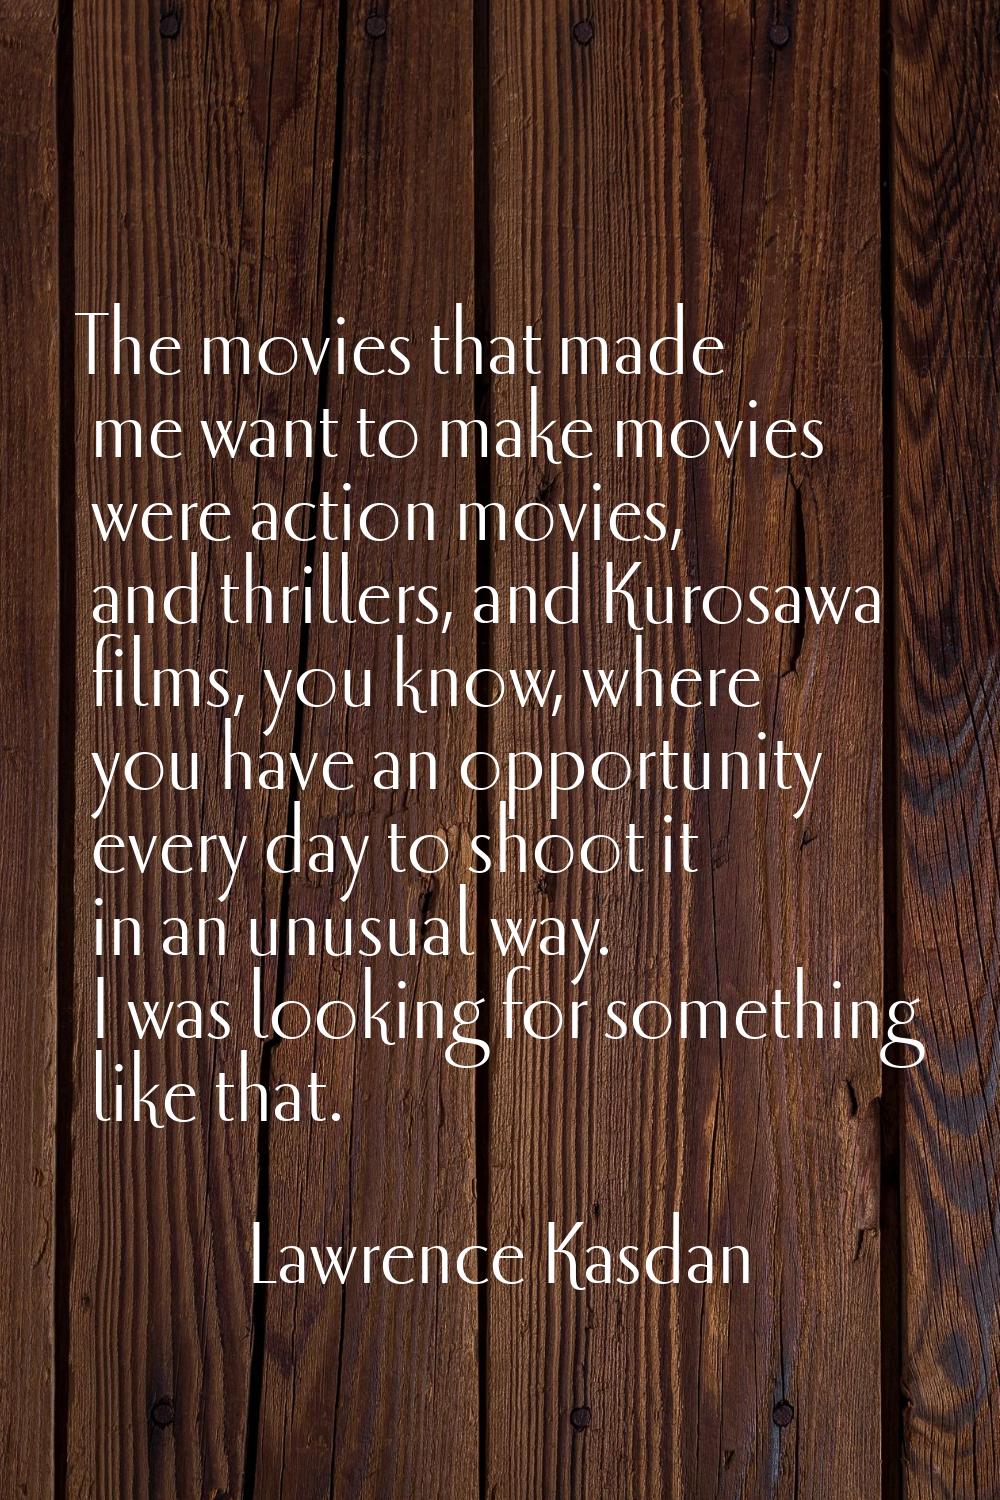 The movies that made me want to make movies were action movies, and thrillers, and Kurosawa films, 